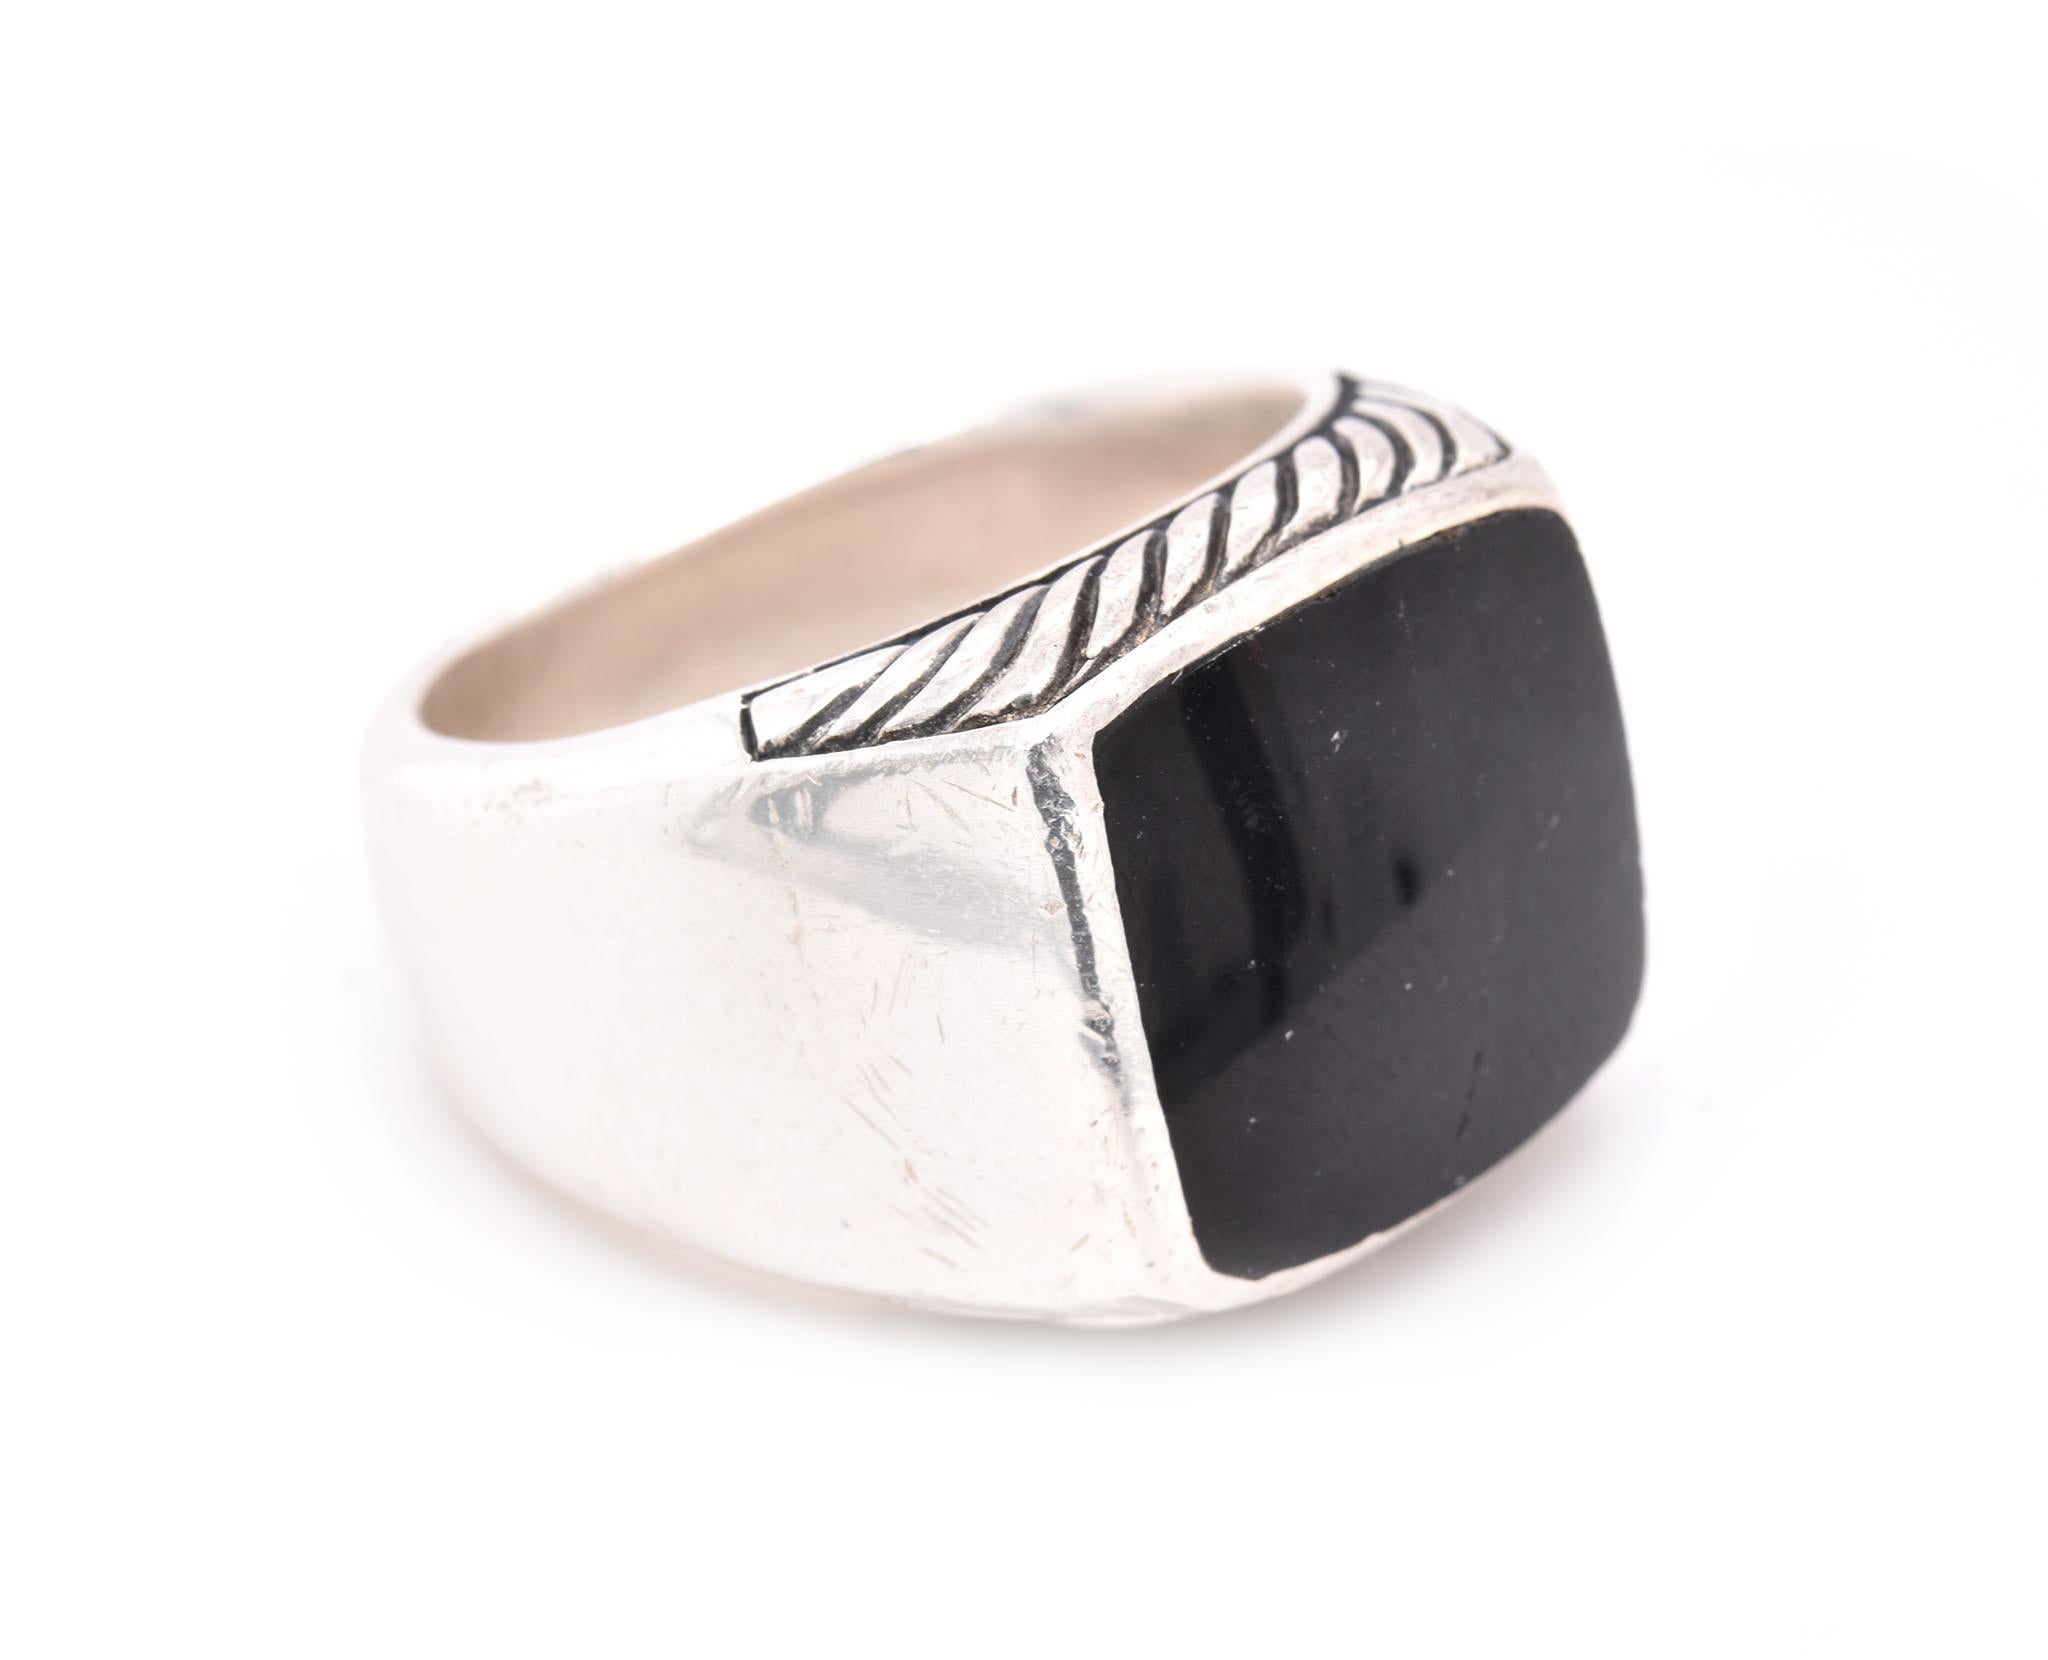 Designer: David Yurman
Material: Sterling Silver 
Dimensions: Ring measures 17.5 X 25.3mm
Size: 9
Weight: 20.99 grams